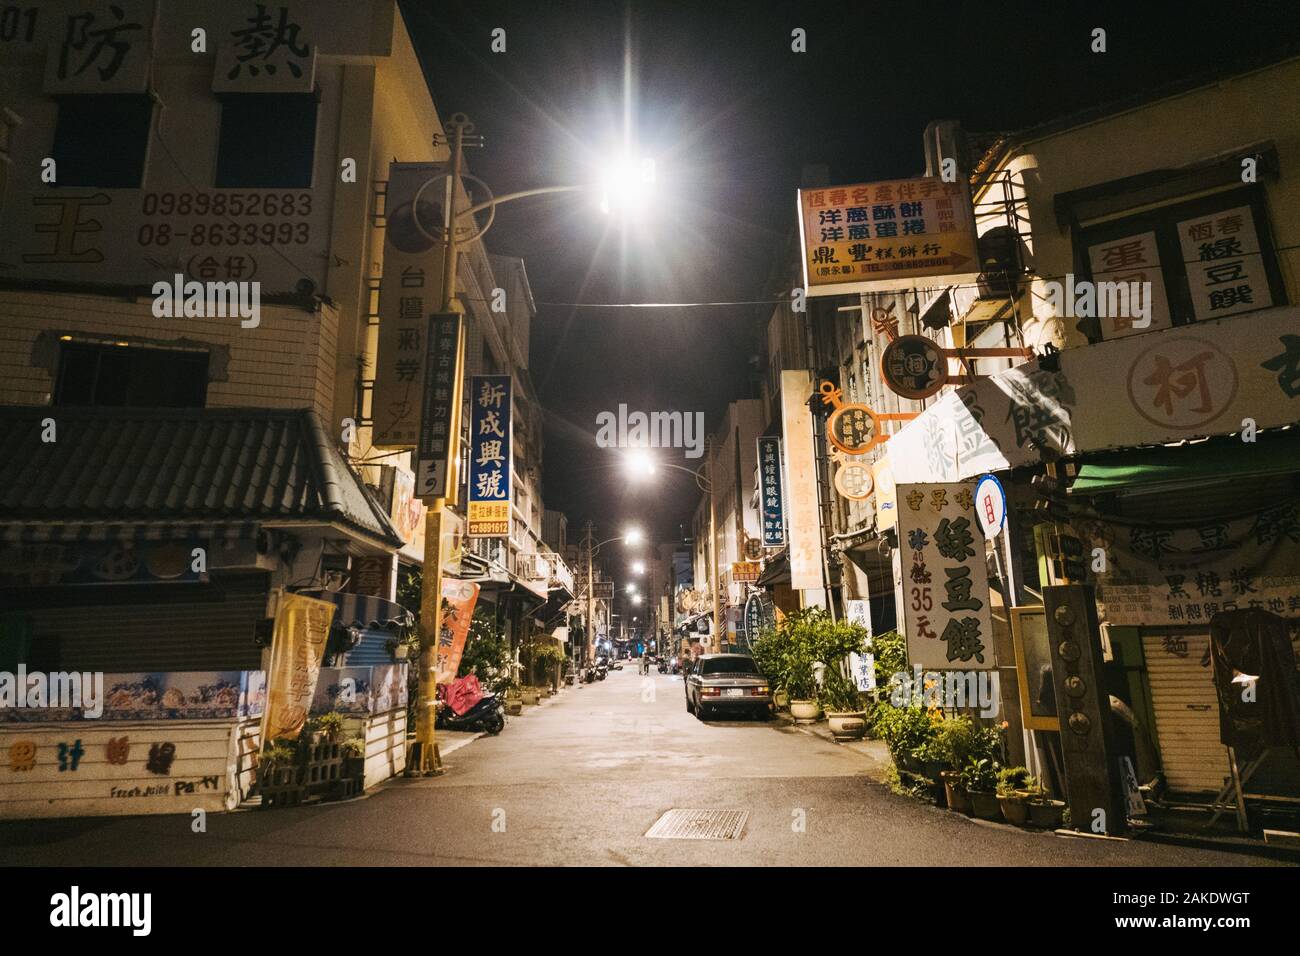 An empty but well-lit alleyway at night in Hengchun Township, Taiwan Stock Photo